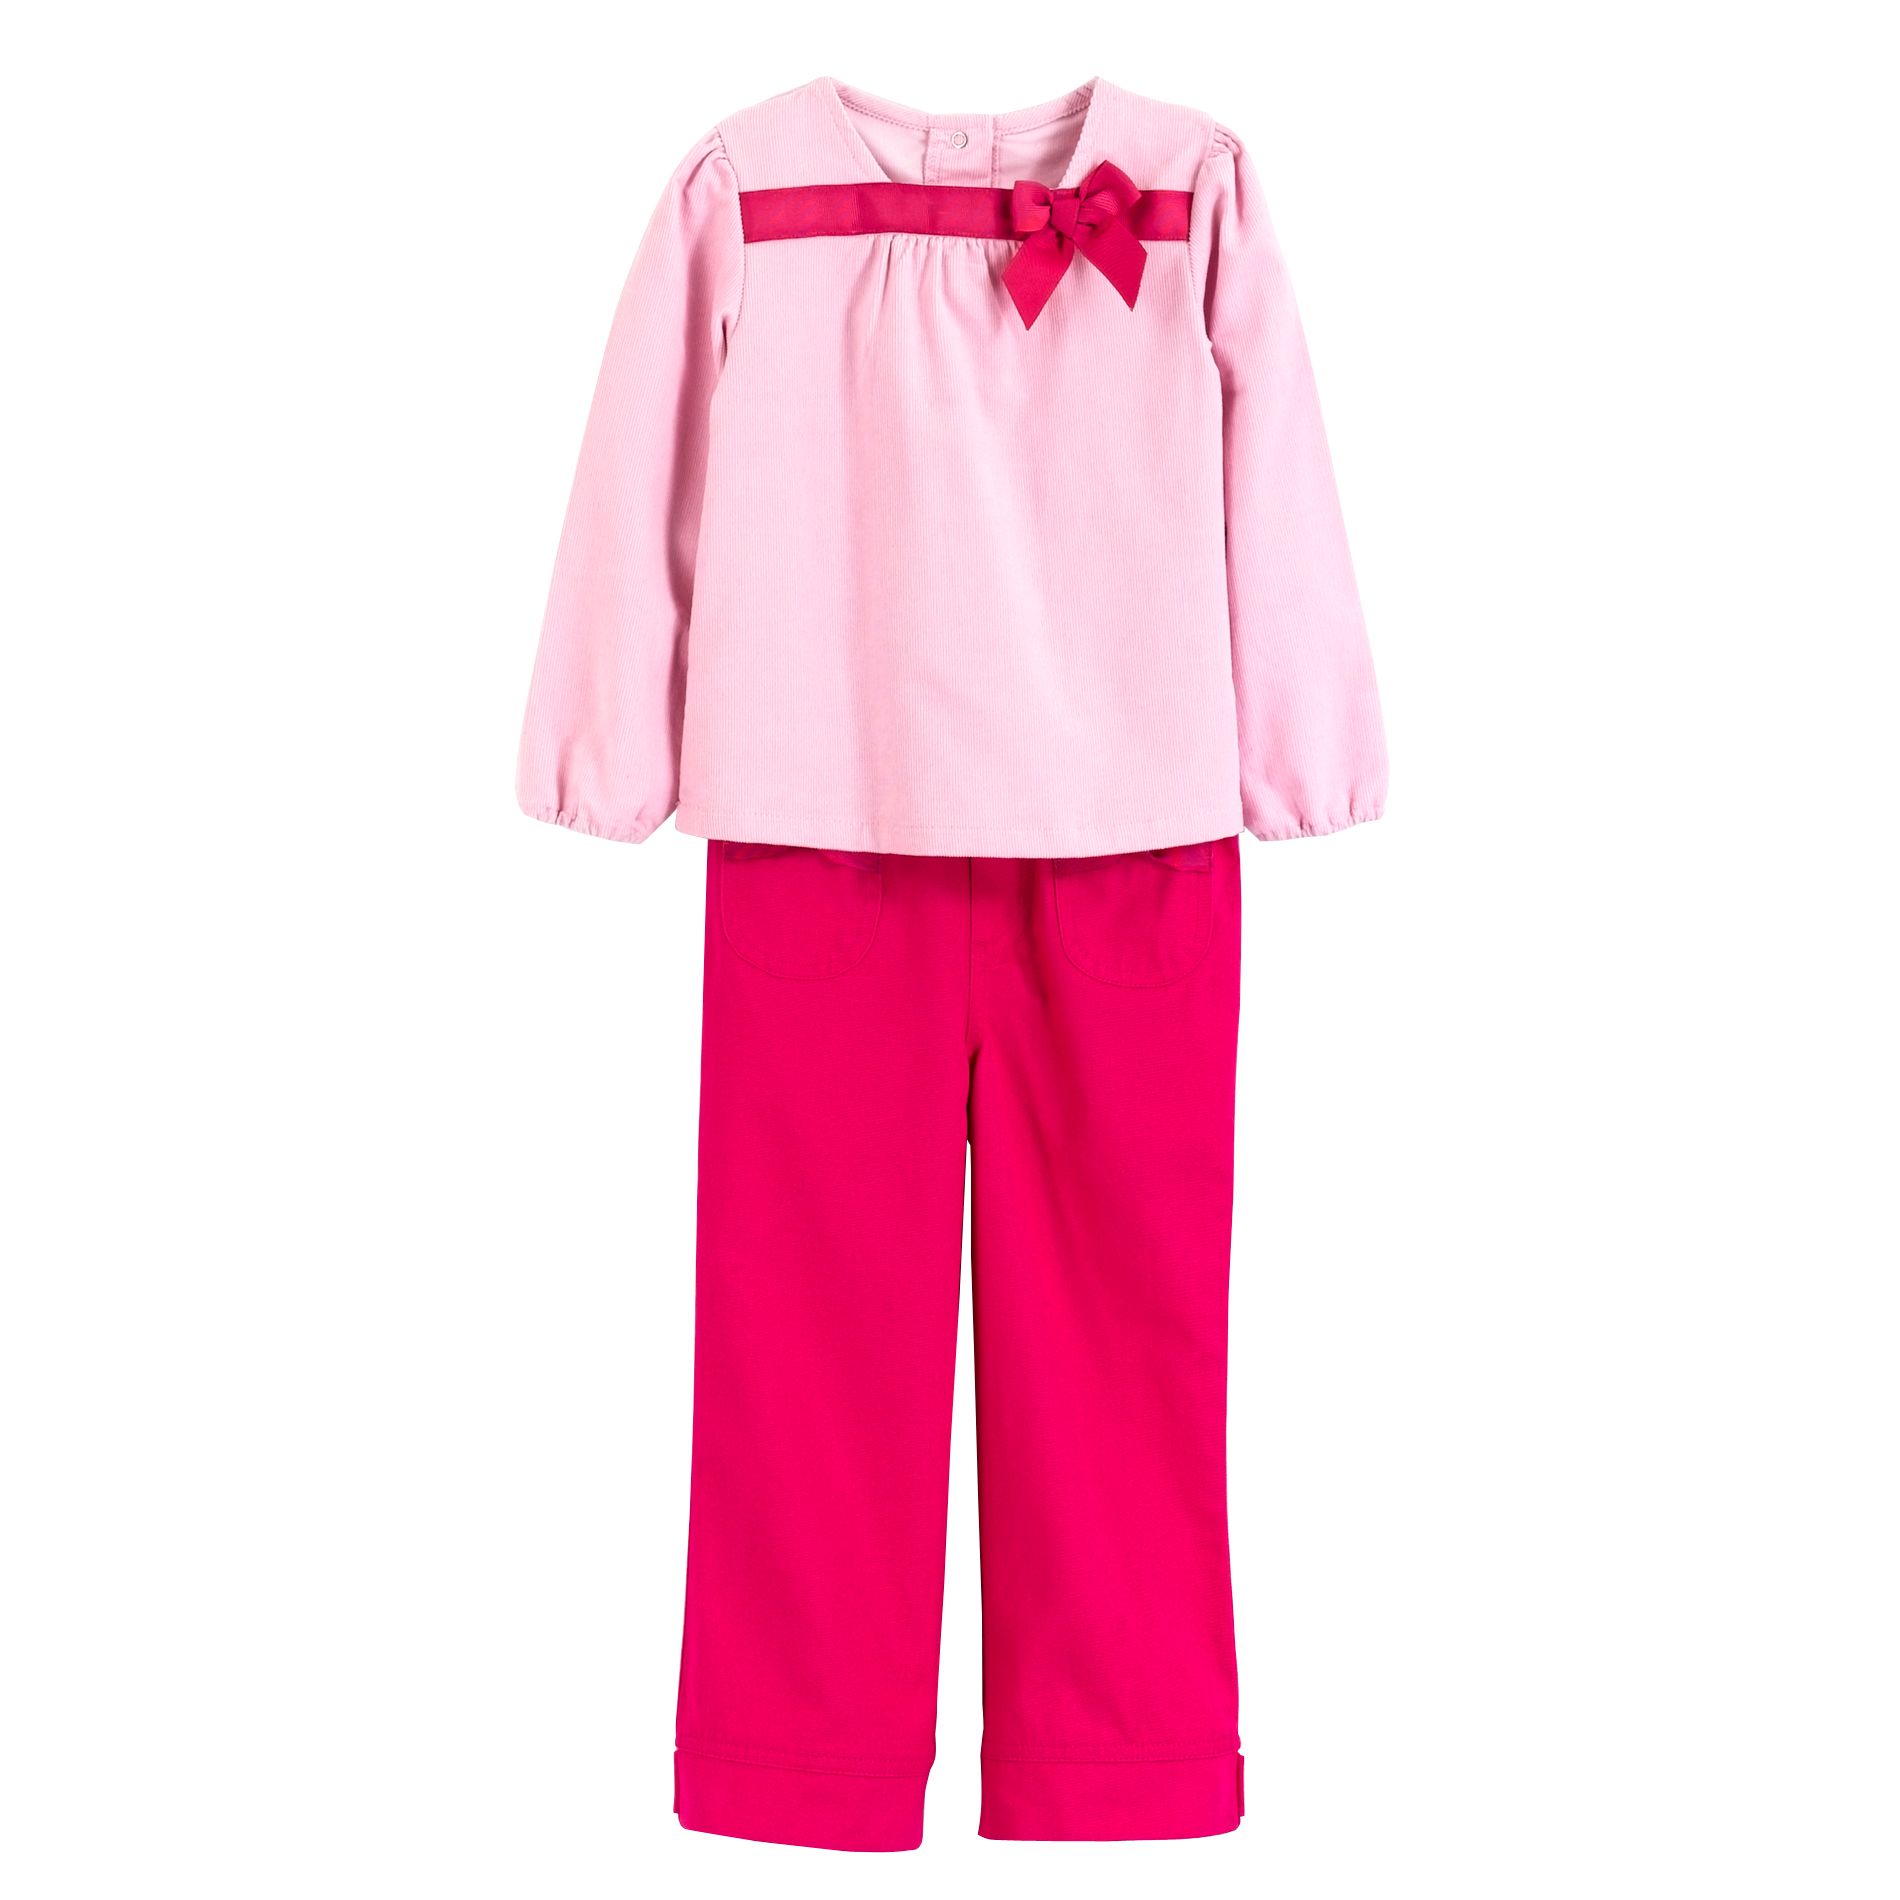 WonderKids Infant Girl's Cord Top With Twll pants Set